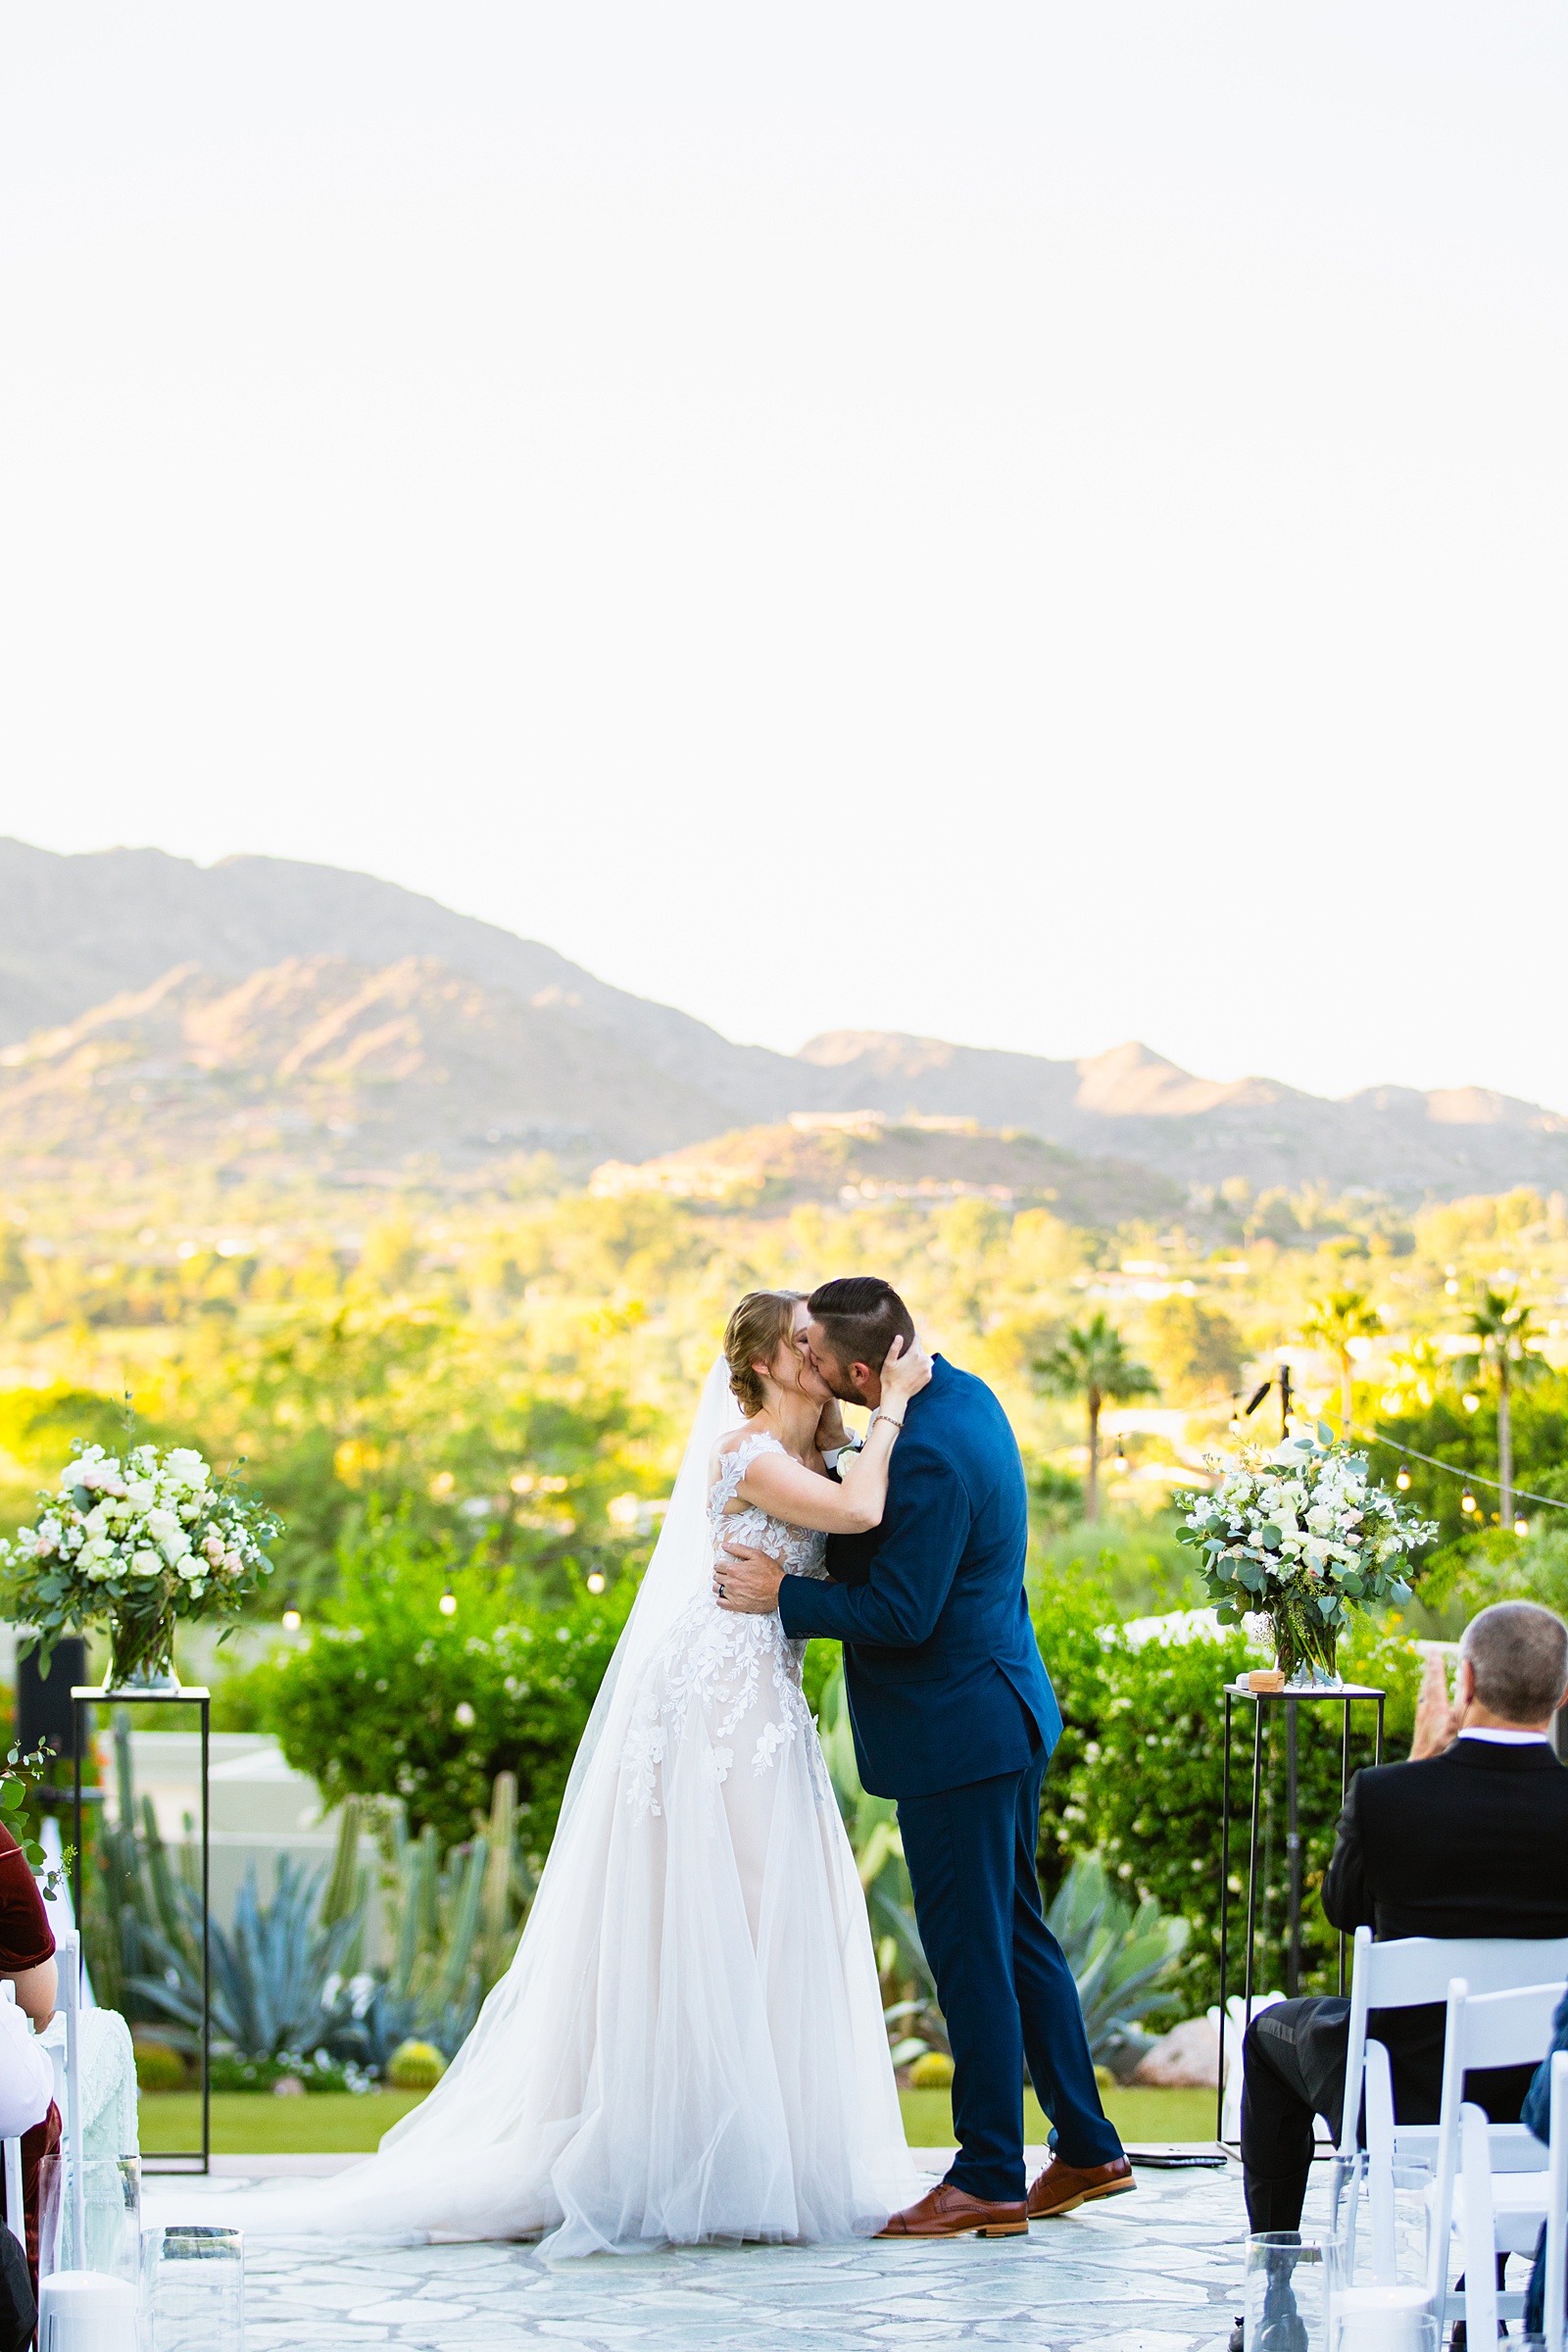 Bride & Groom share their first kiss during their wedding ceremony at Sanctuary by Arizona wedding photographer Juniper and Co Photography.